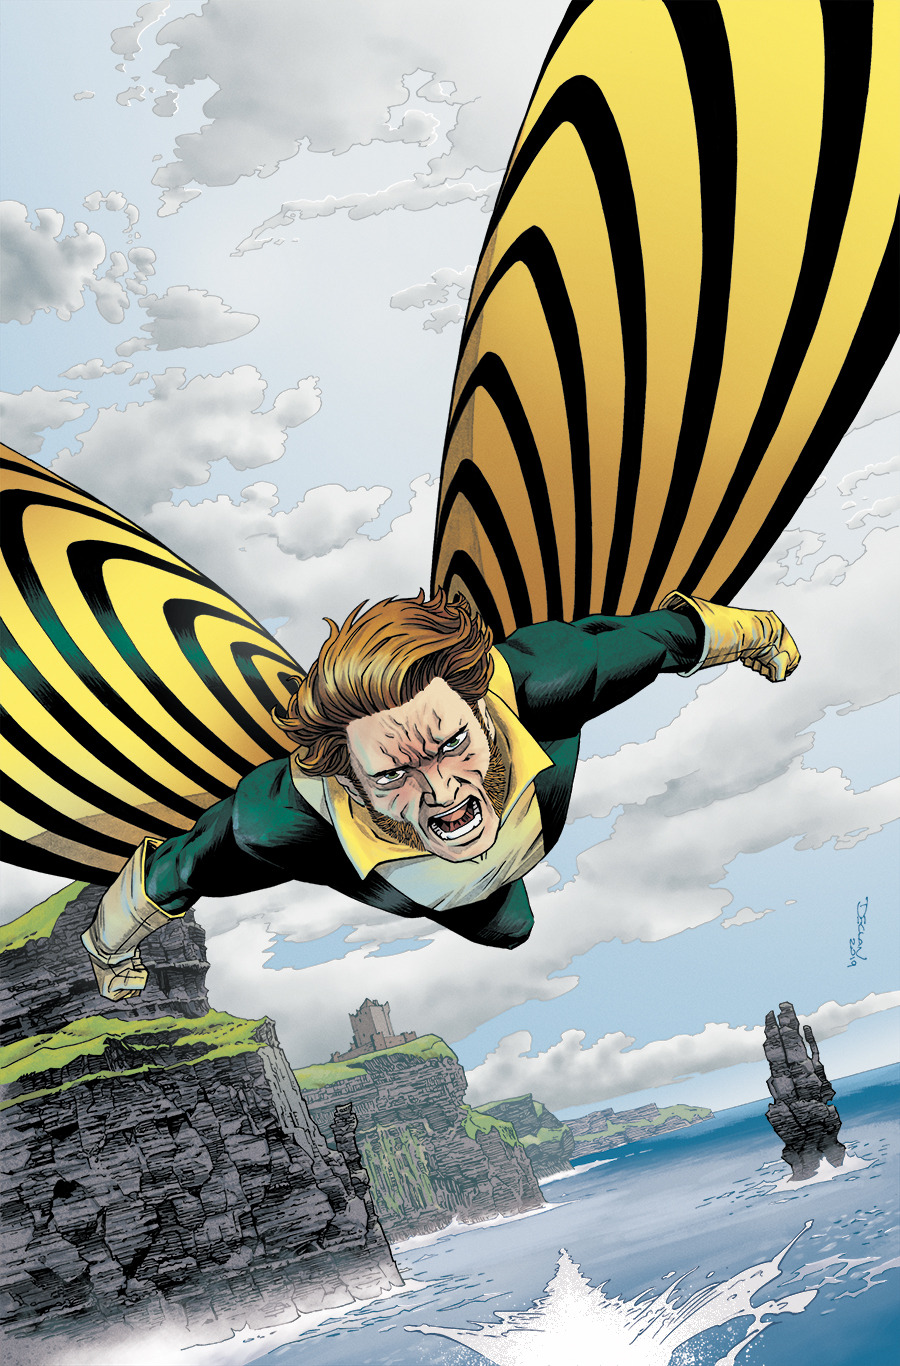 Sean Cassidy soars through the air screaming. He is wearing the classic yellow and green Banshee costume complete with yellow and black striped cape wings. 